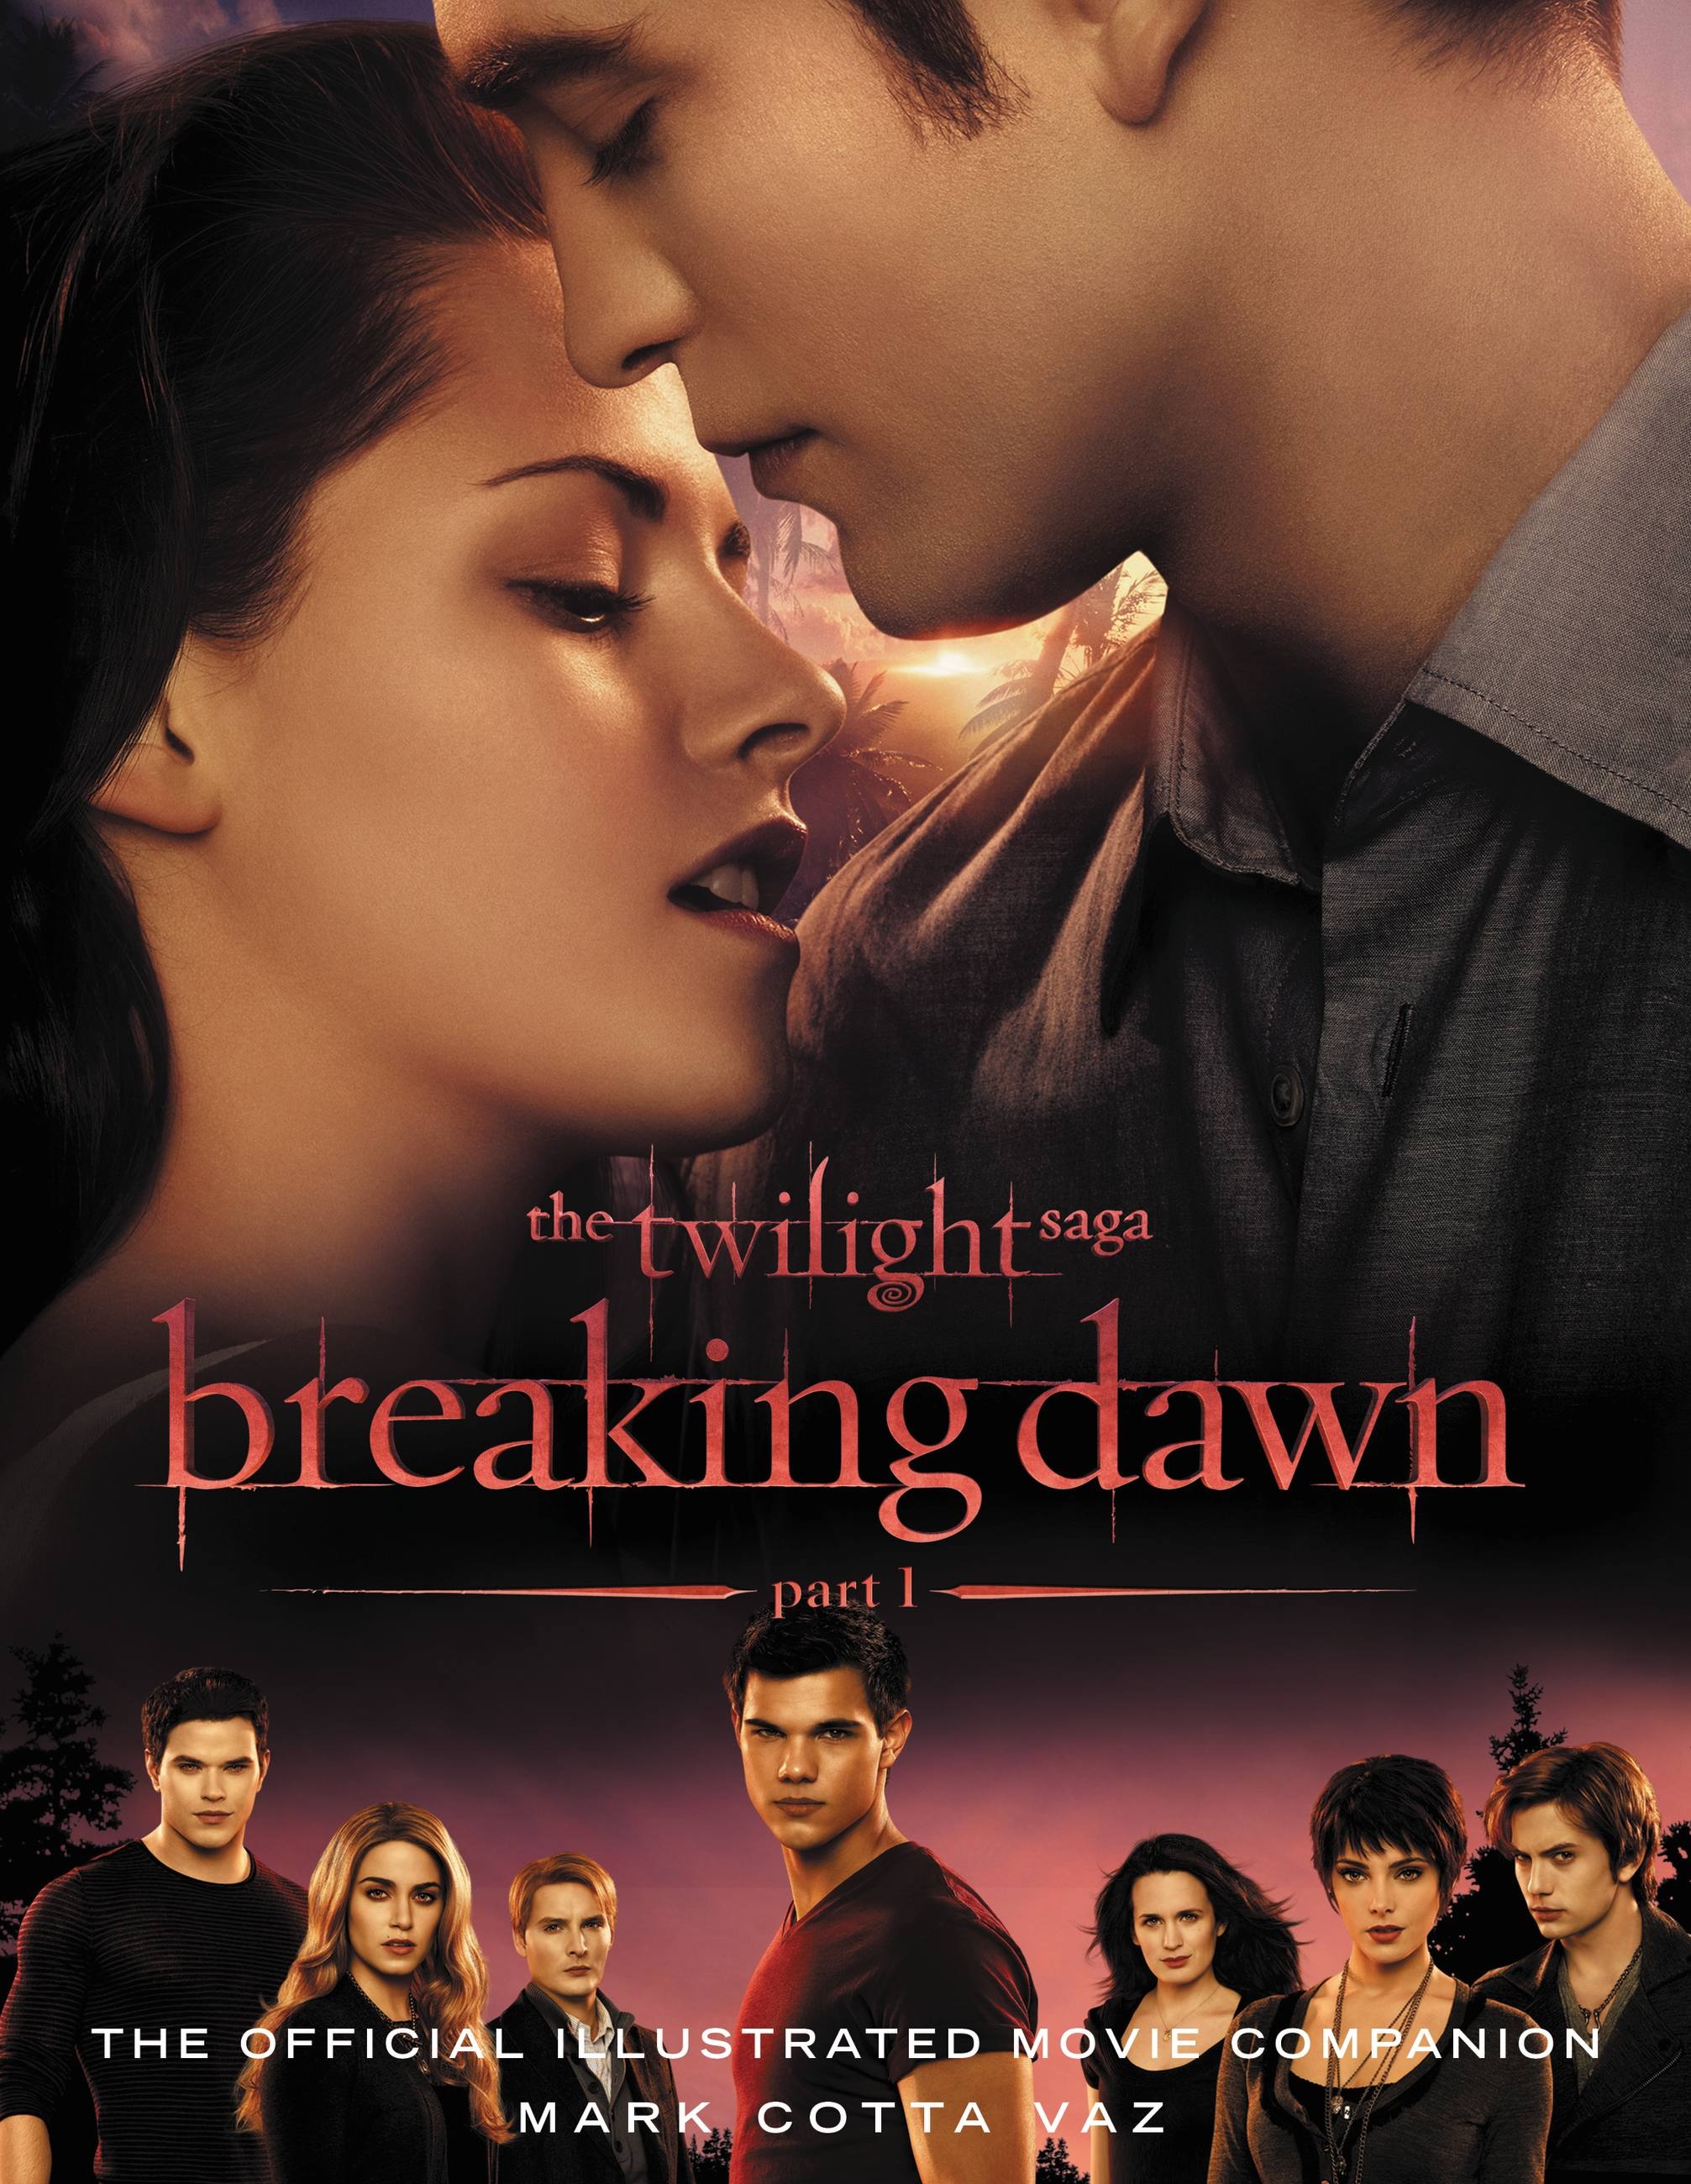 The Twilight Saga Breaking Dawn Part 1: The Official Illustrated